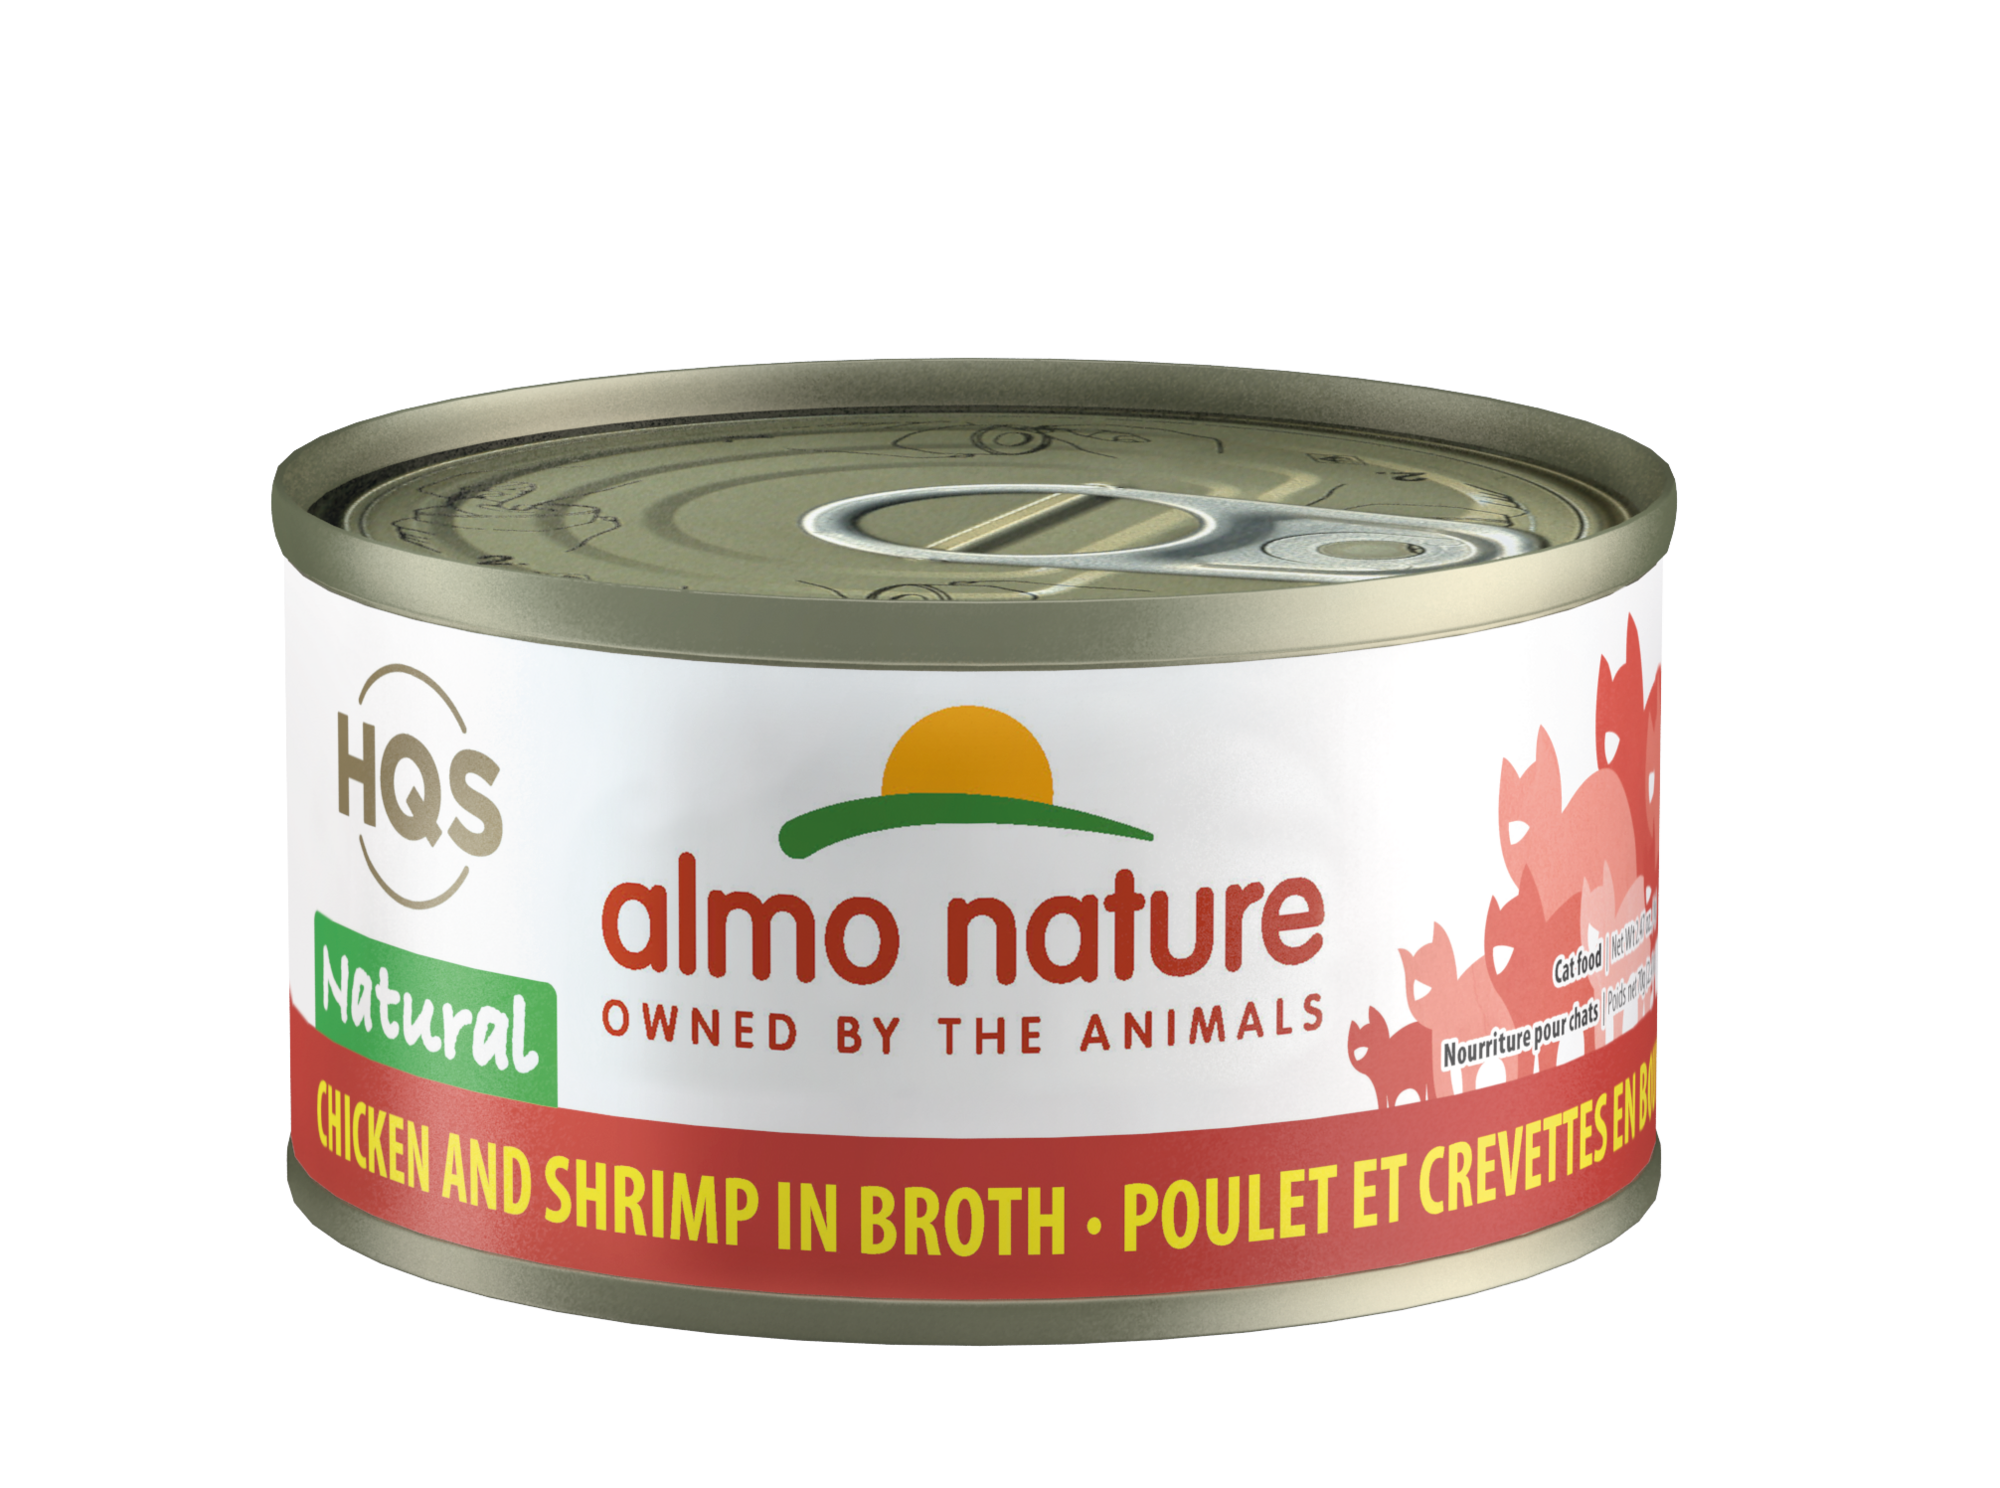 24 Pack) Almo Nature HQS Chicken and Liver in Grain Free Cat Food, 2.47 oz. Cans -